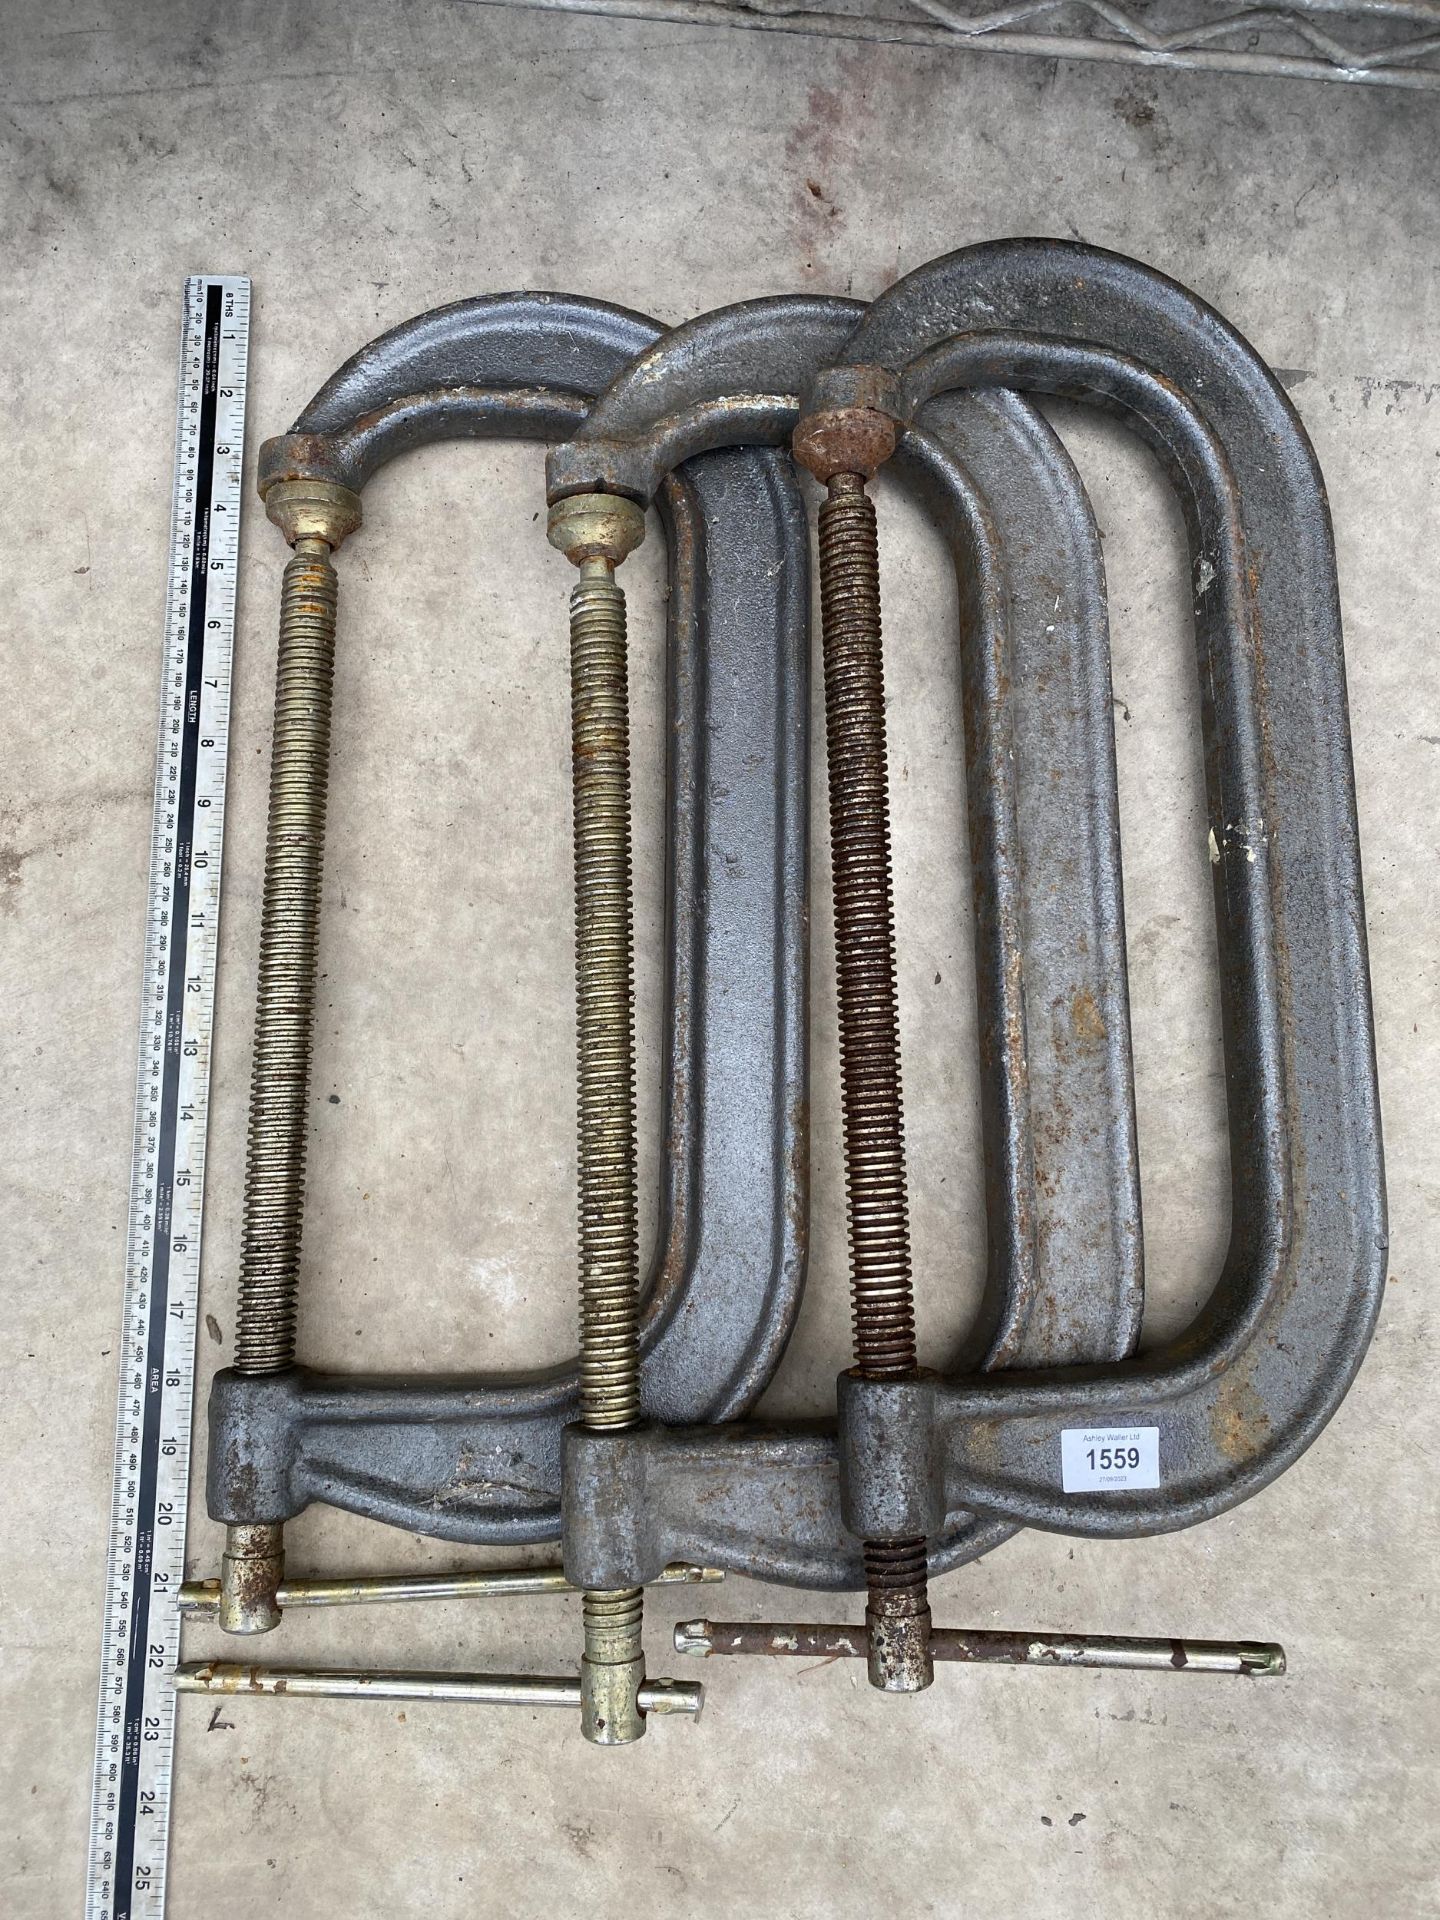 A SET OF THREE HEAVY DUTY 19" G CLAMPS